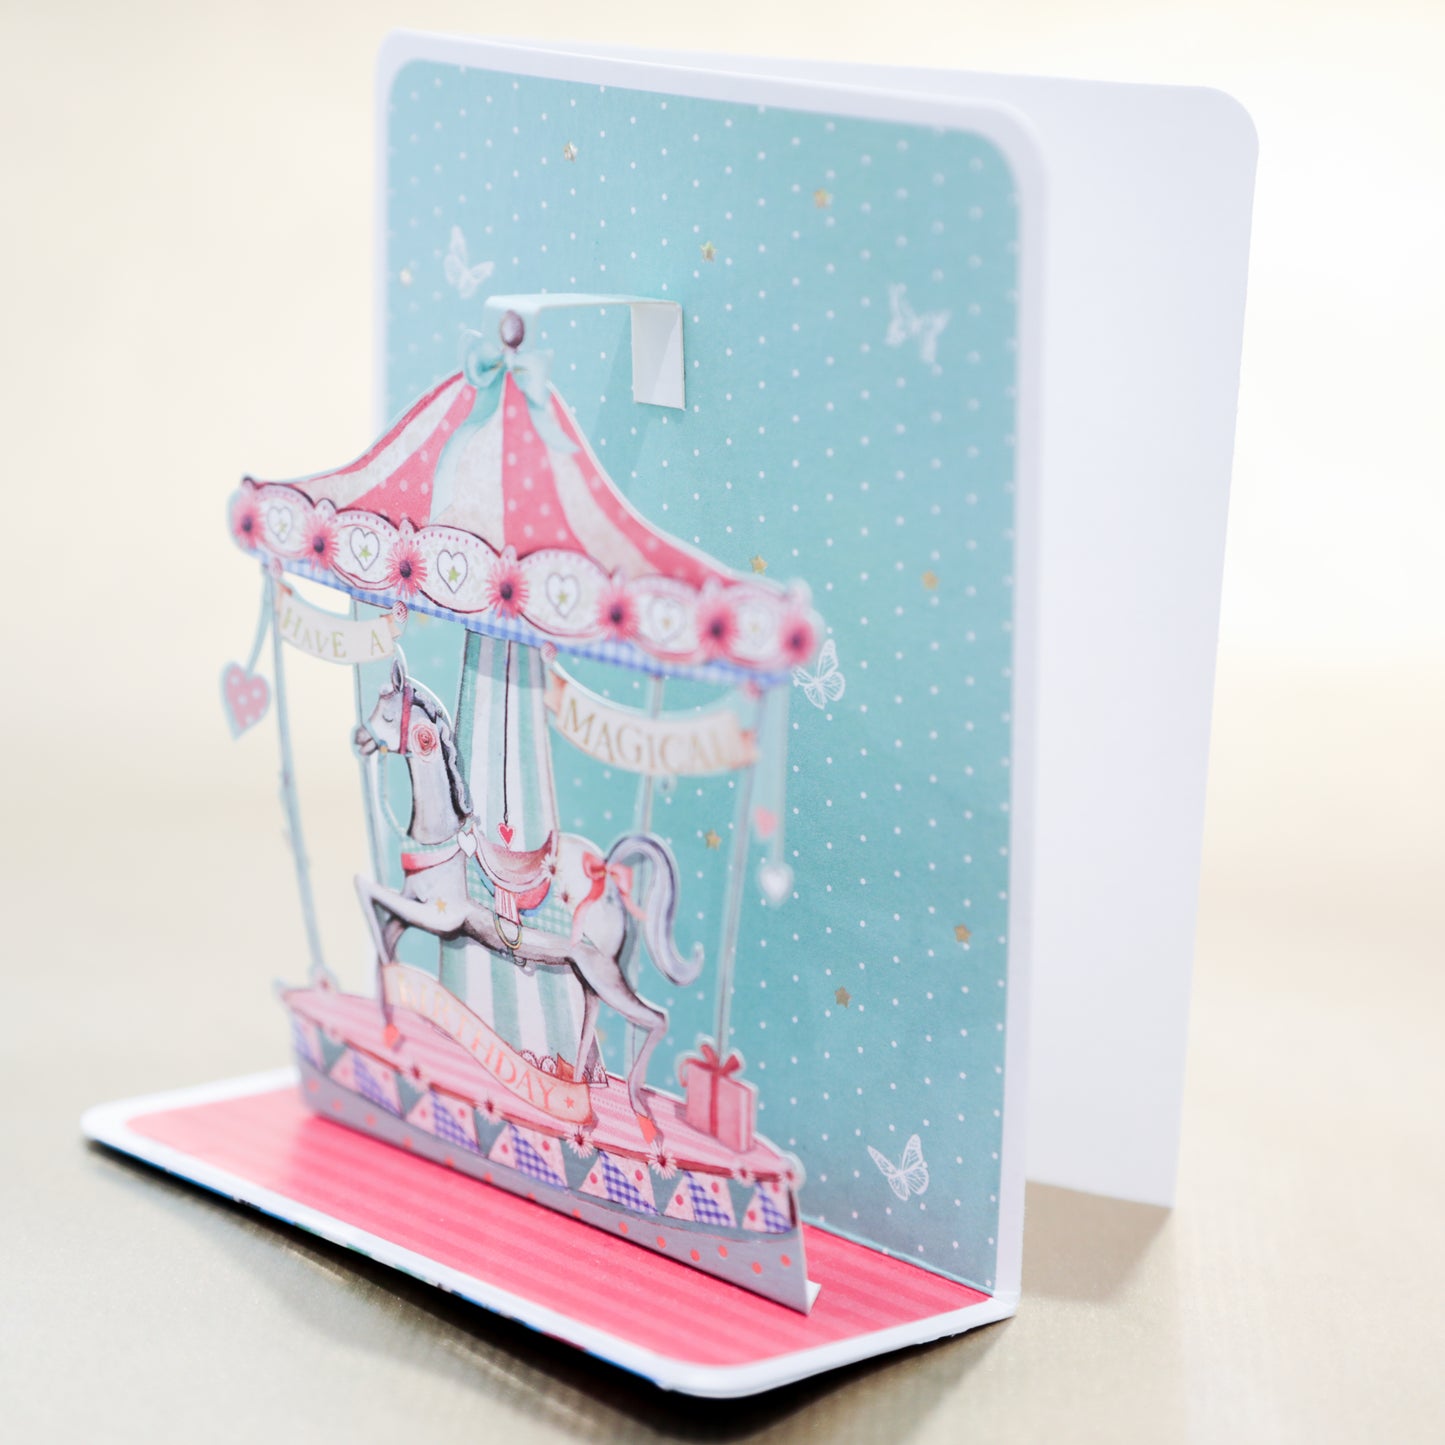 3D Greeting Card - Carousel Horse ‘Have a Magical Birthday’ Children's